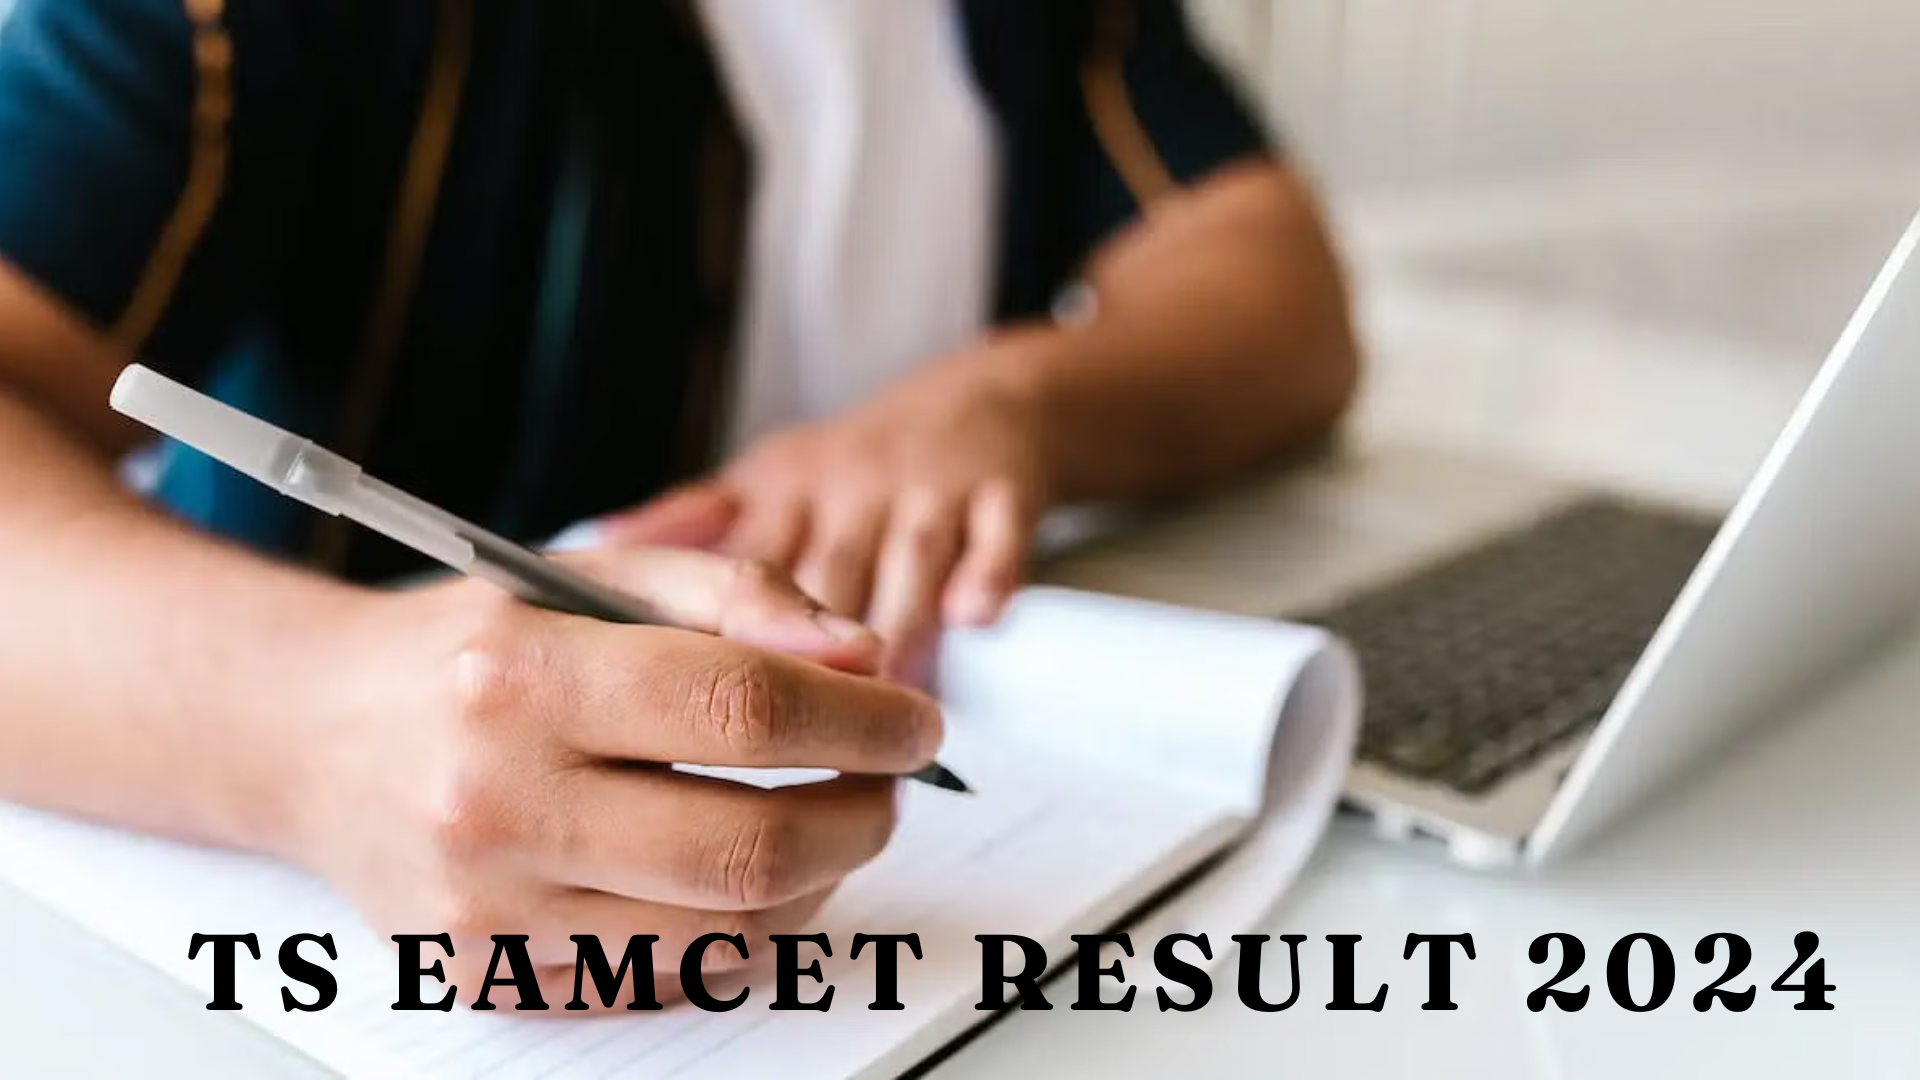 TS EAMCET Result 2024 Released, Check Steps to Download Your Scorecard